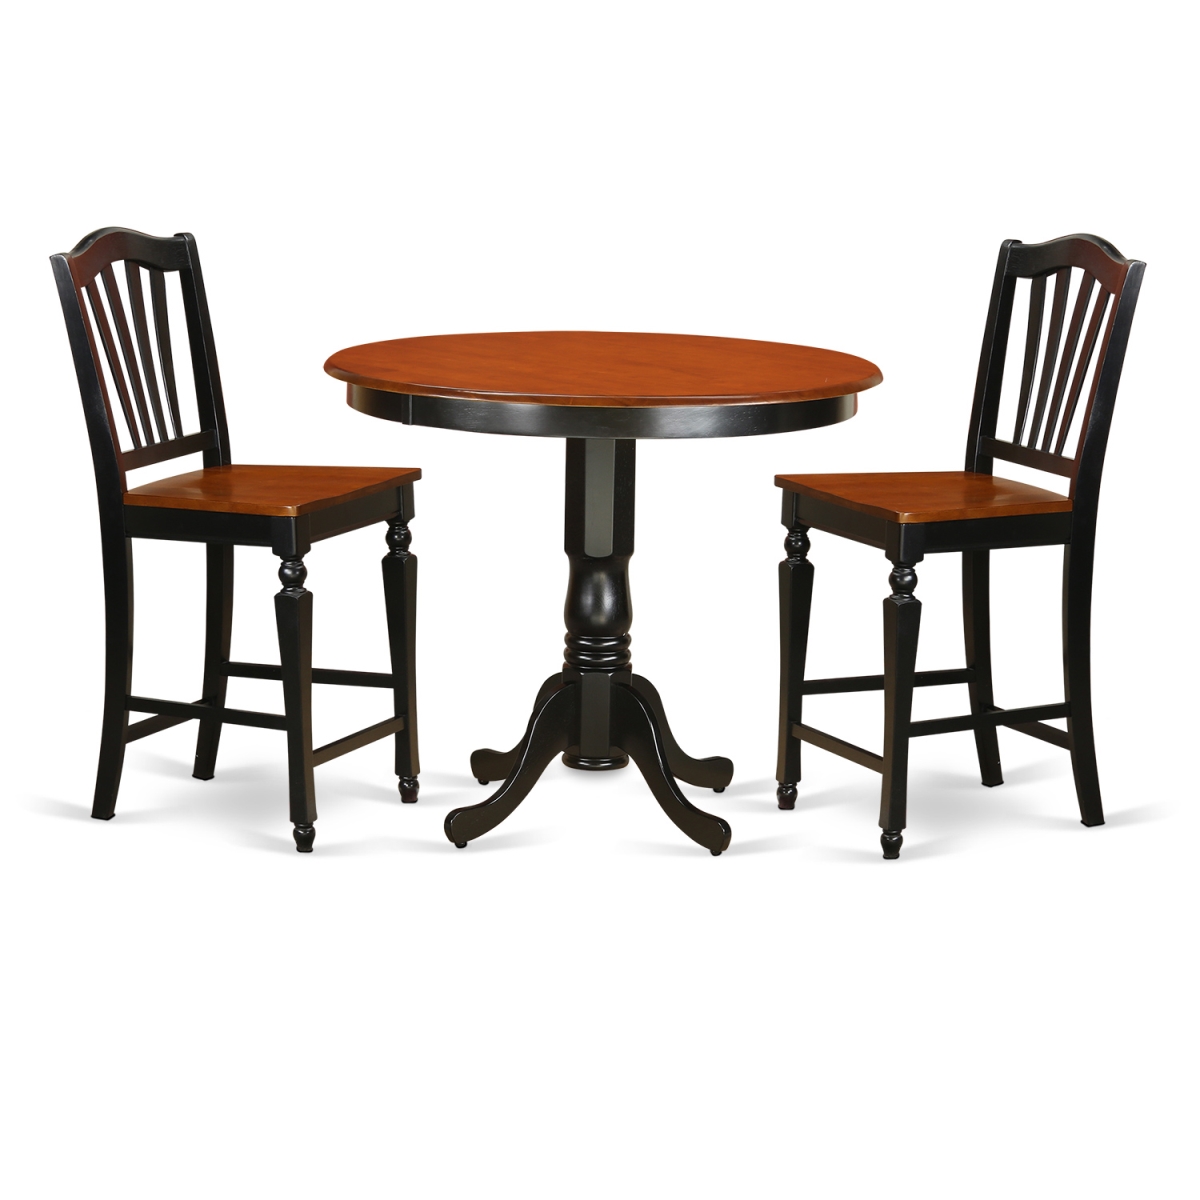 Counter Height Pub Table & 2 Kitchen Chairs, Black Finish